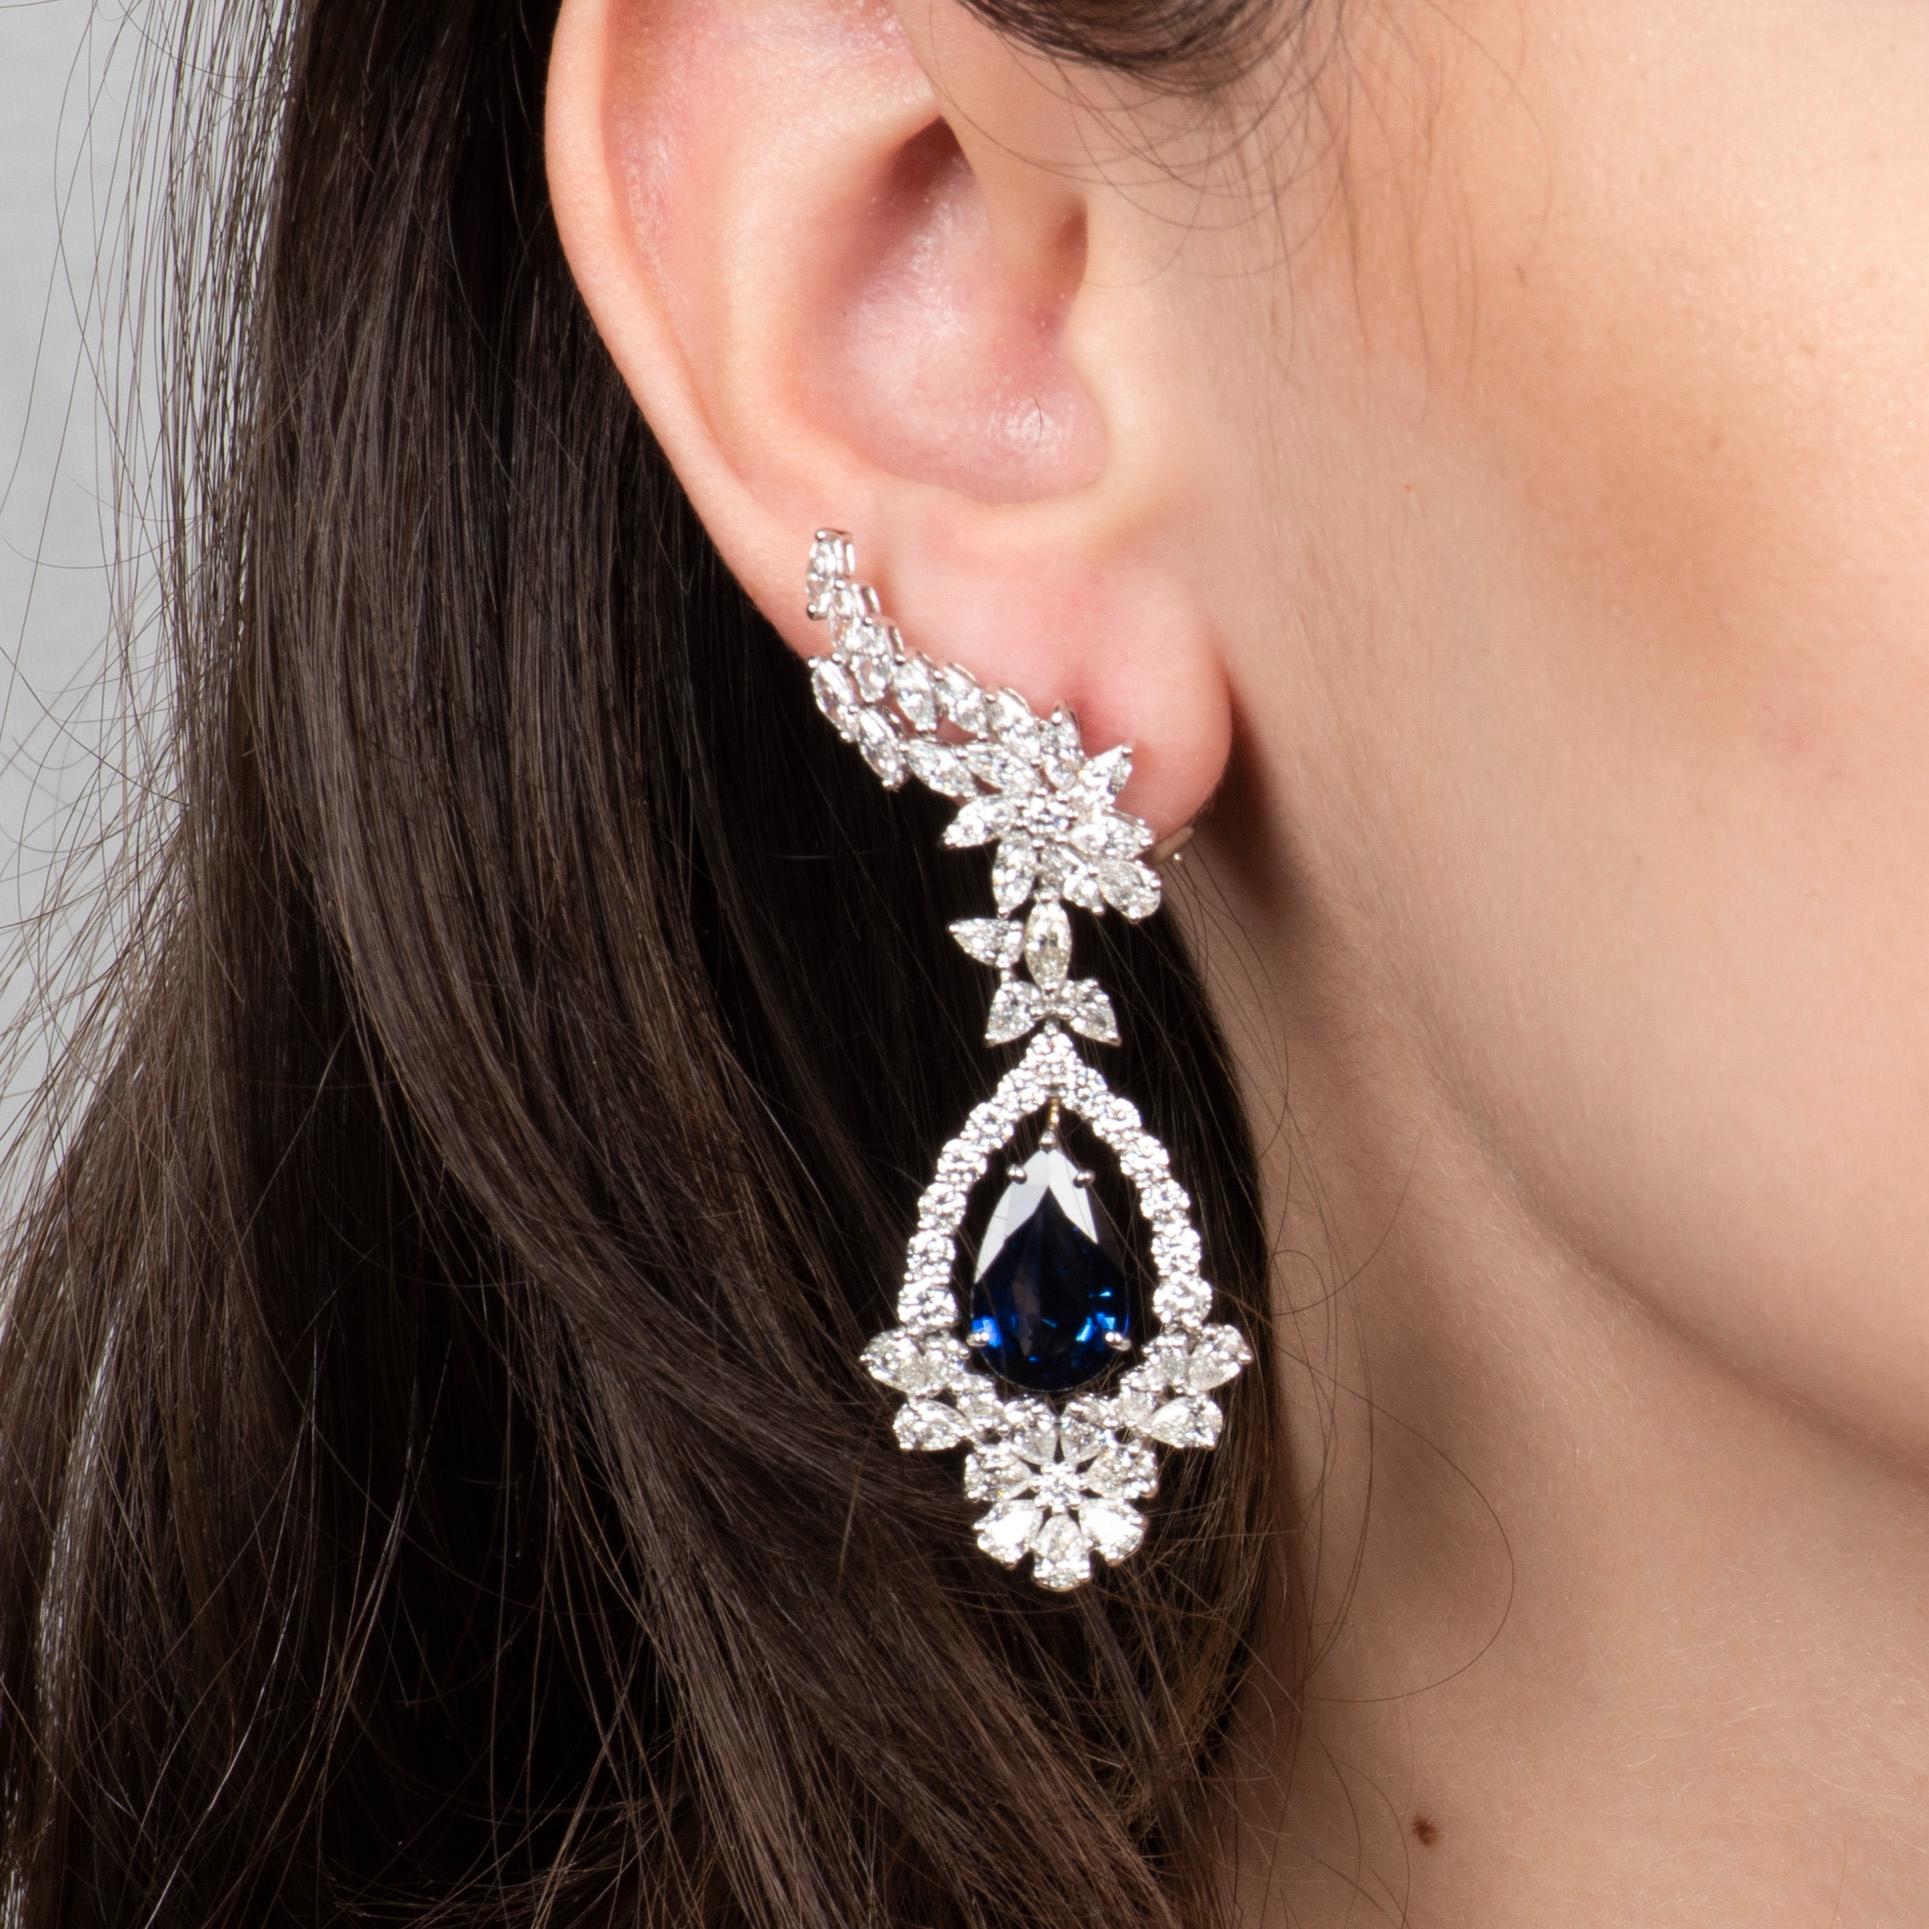 These stunning, extravagant earrings feature a 10.58ctw in a pair of pear shaped natural blue sapphires, surrounded by 10.34ctw in fine white diamonds (in round, marquise, and pear shapes) forming florets and an angel wing pattern on the earlobe.